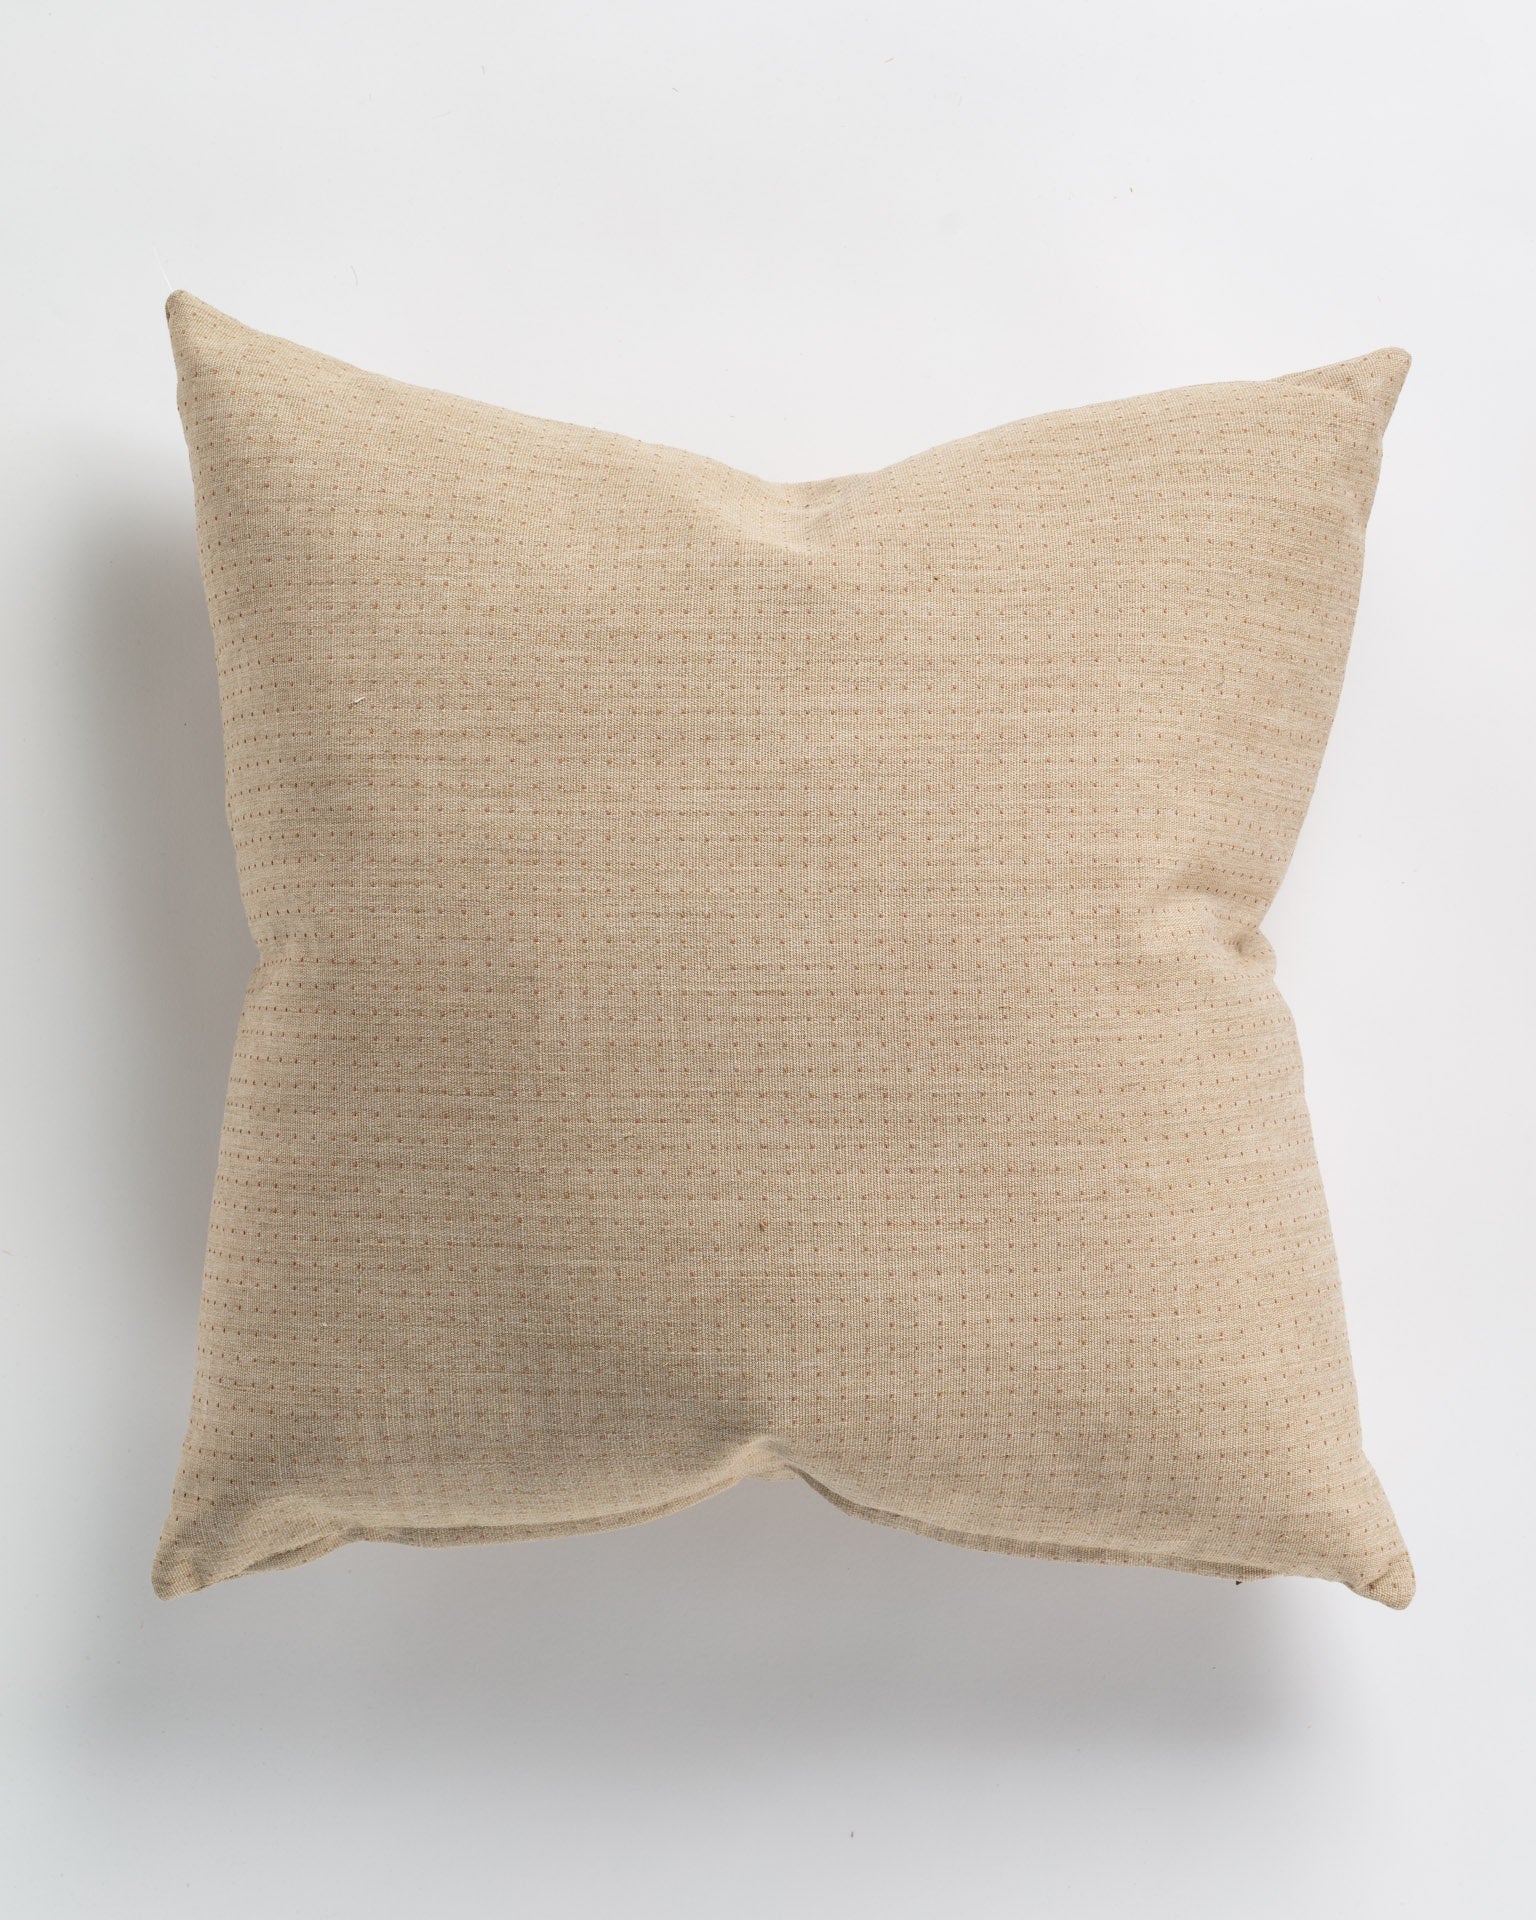 A square beige cushion with a subtle textured pattern is shown on a plain white background. The 26x26" Happy Dot Blush Pillow appears soft and plush with a clean, simple design, perfect as a Gabby accent piece.